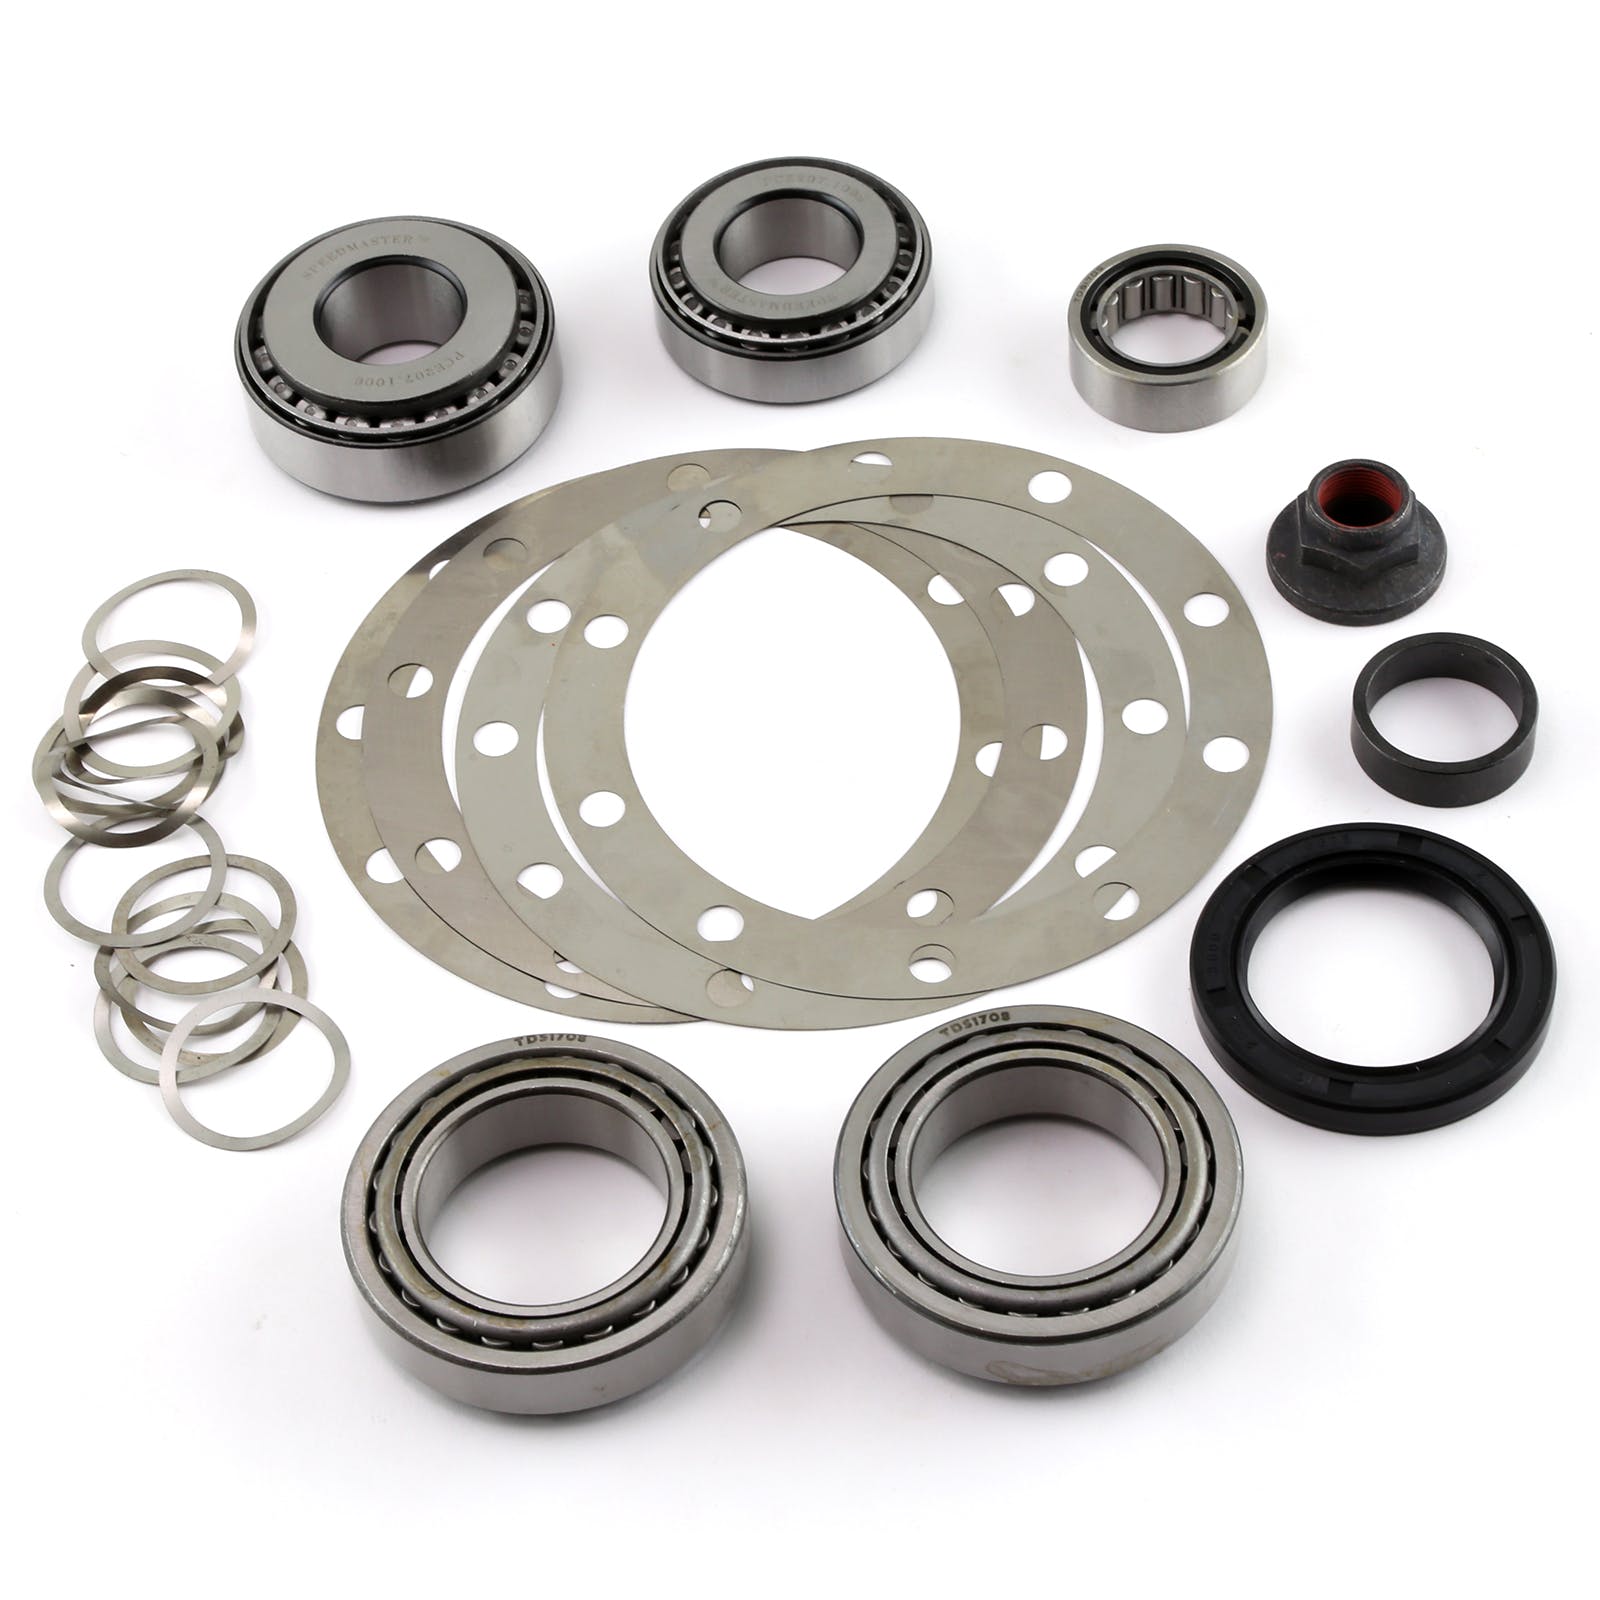 Speedmaster PCE593.1002 9 Rear End Ring and Pinion Bearing Installation Rebuild Kit 3.25 Carrier